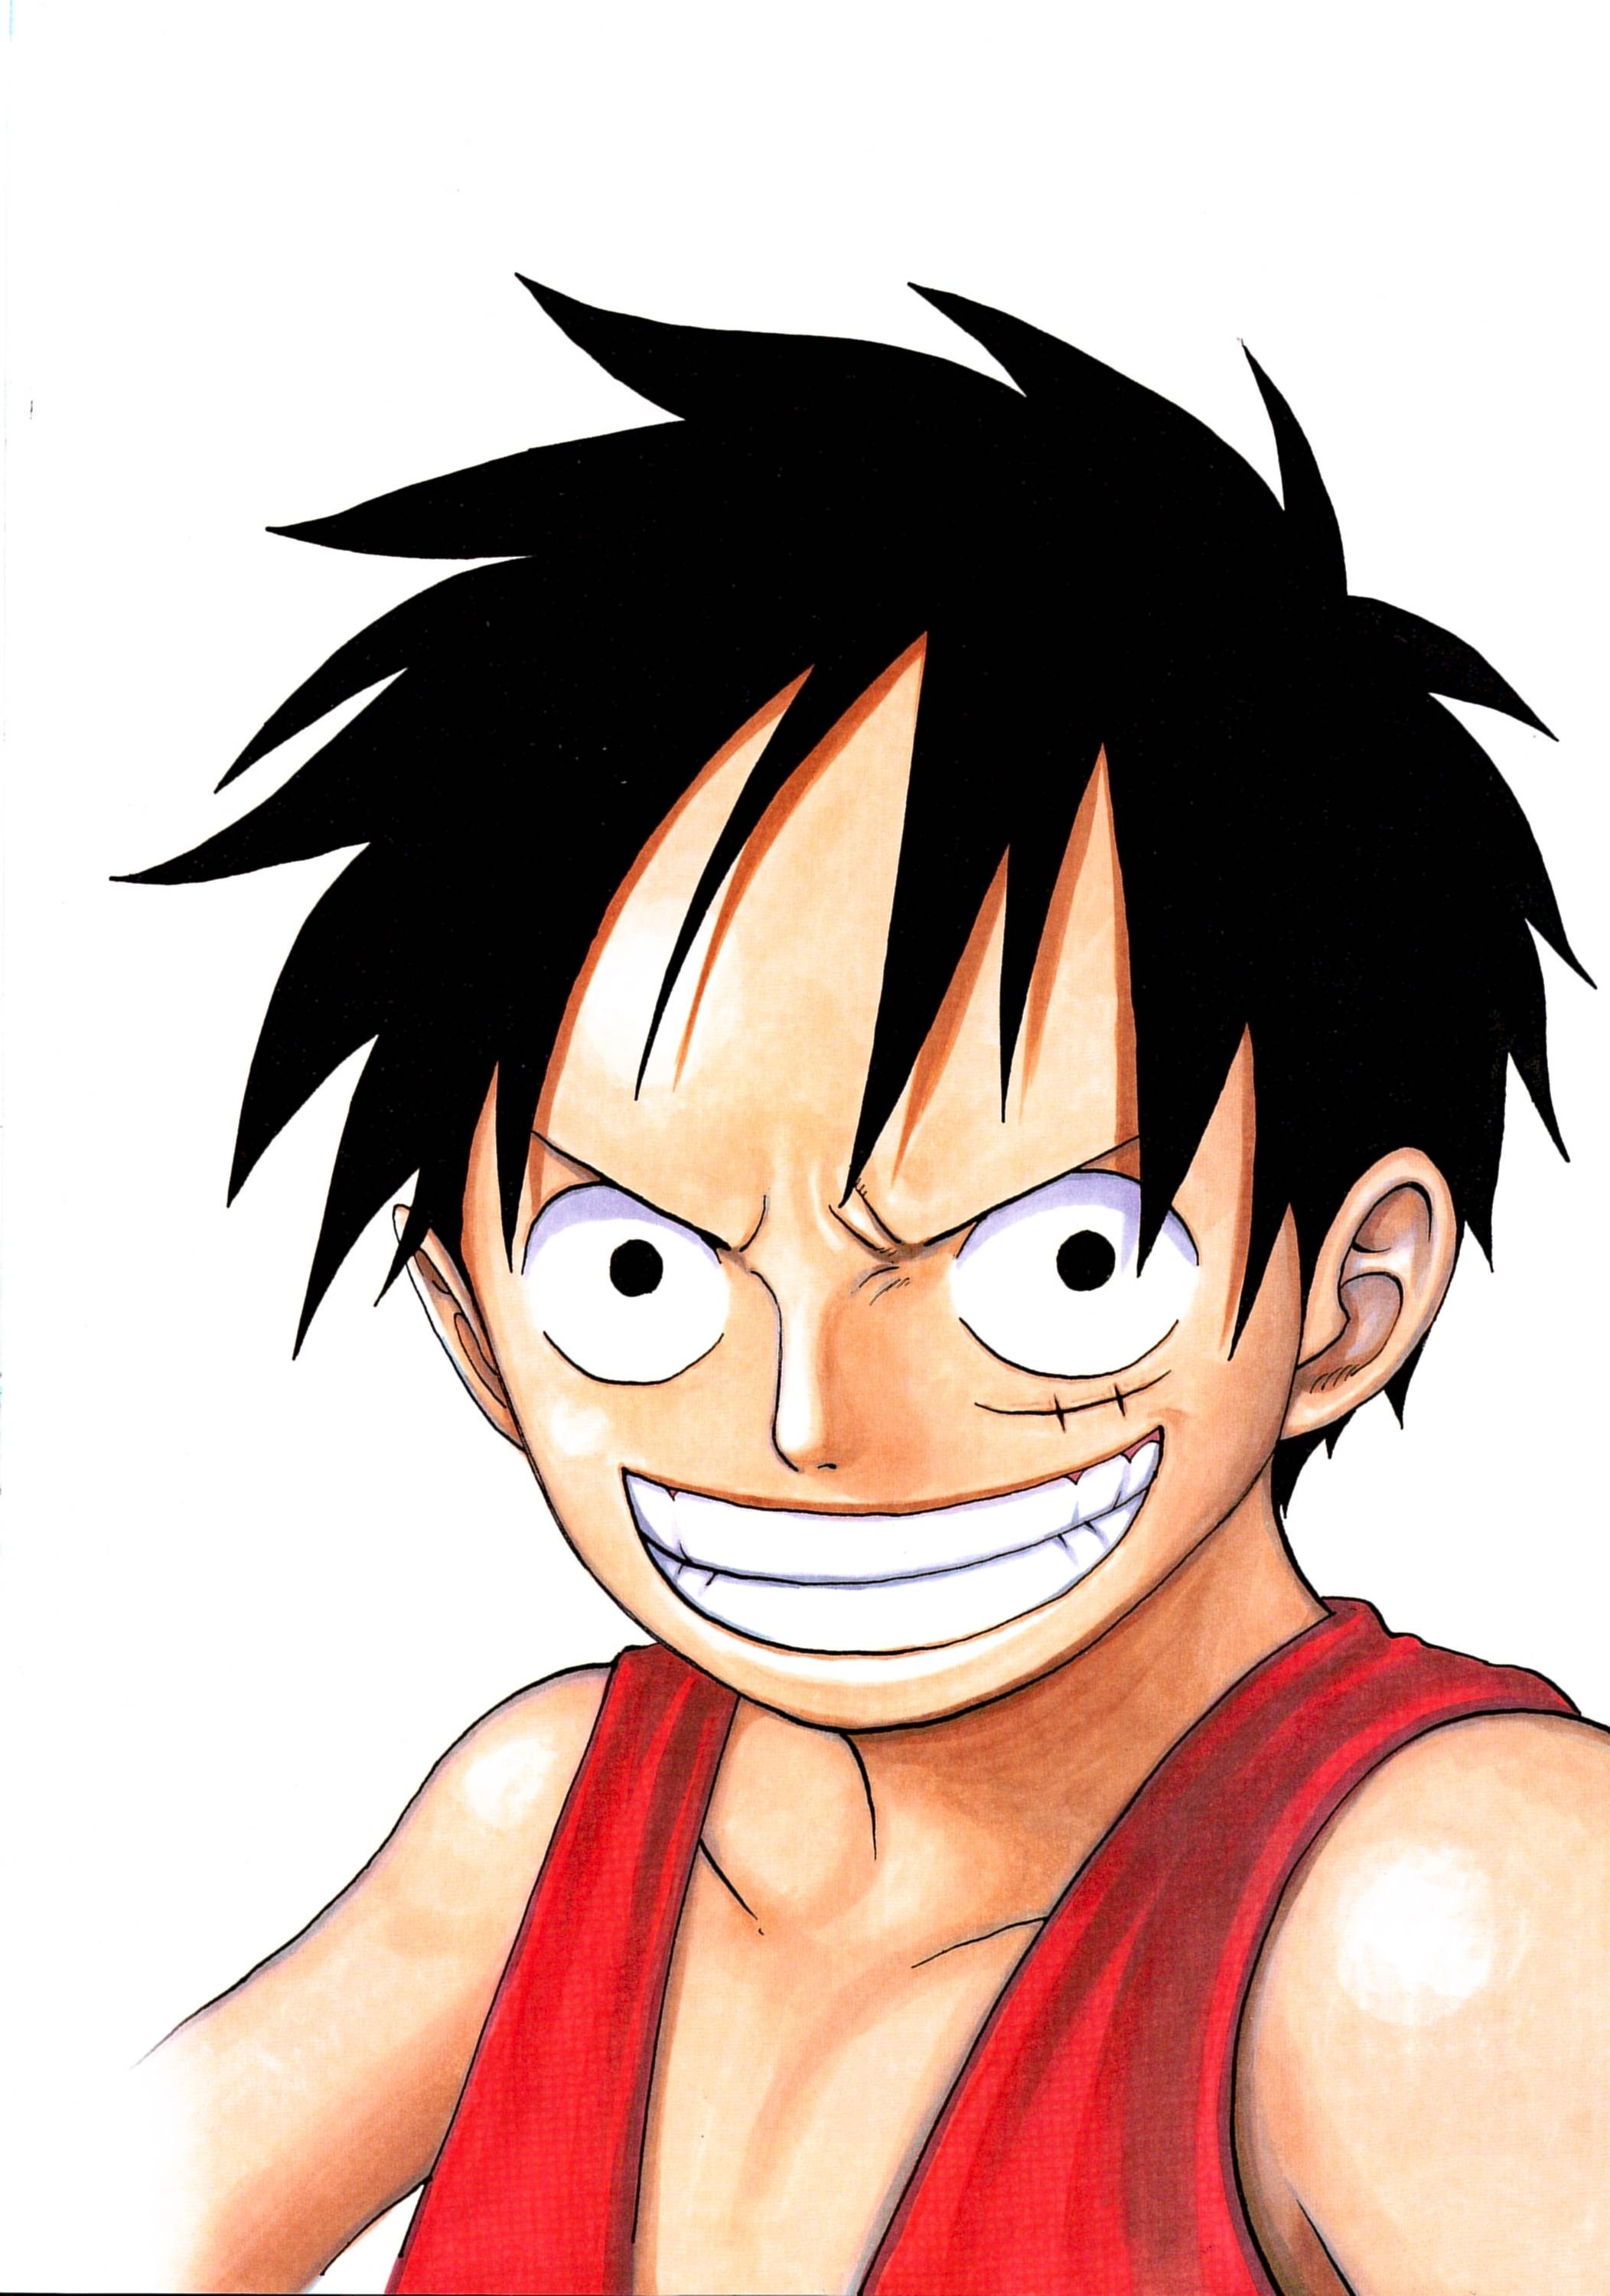  Luffy  wallpaper    Download free awesome High Resolution 